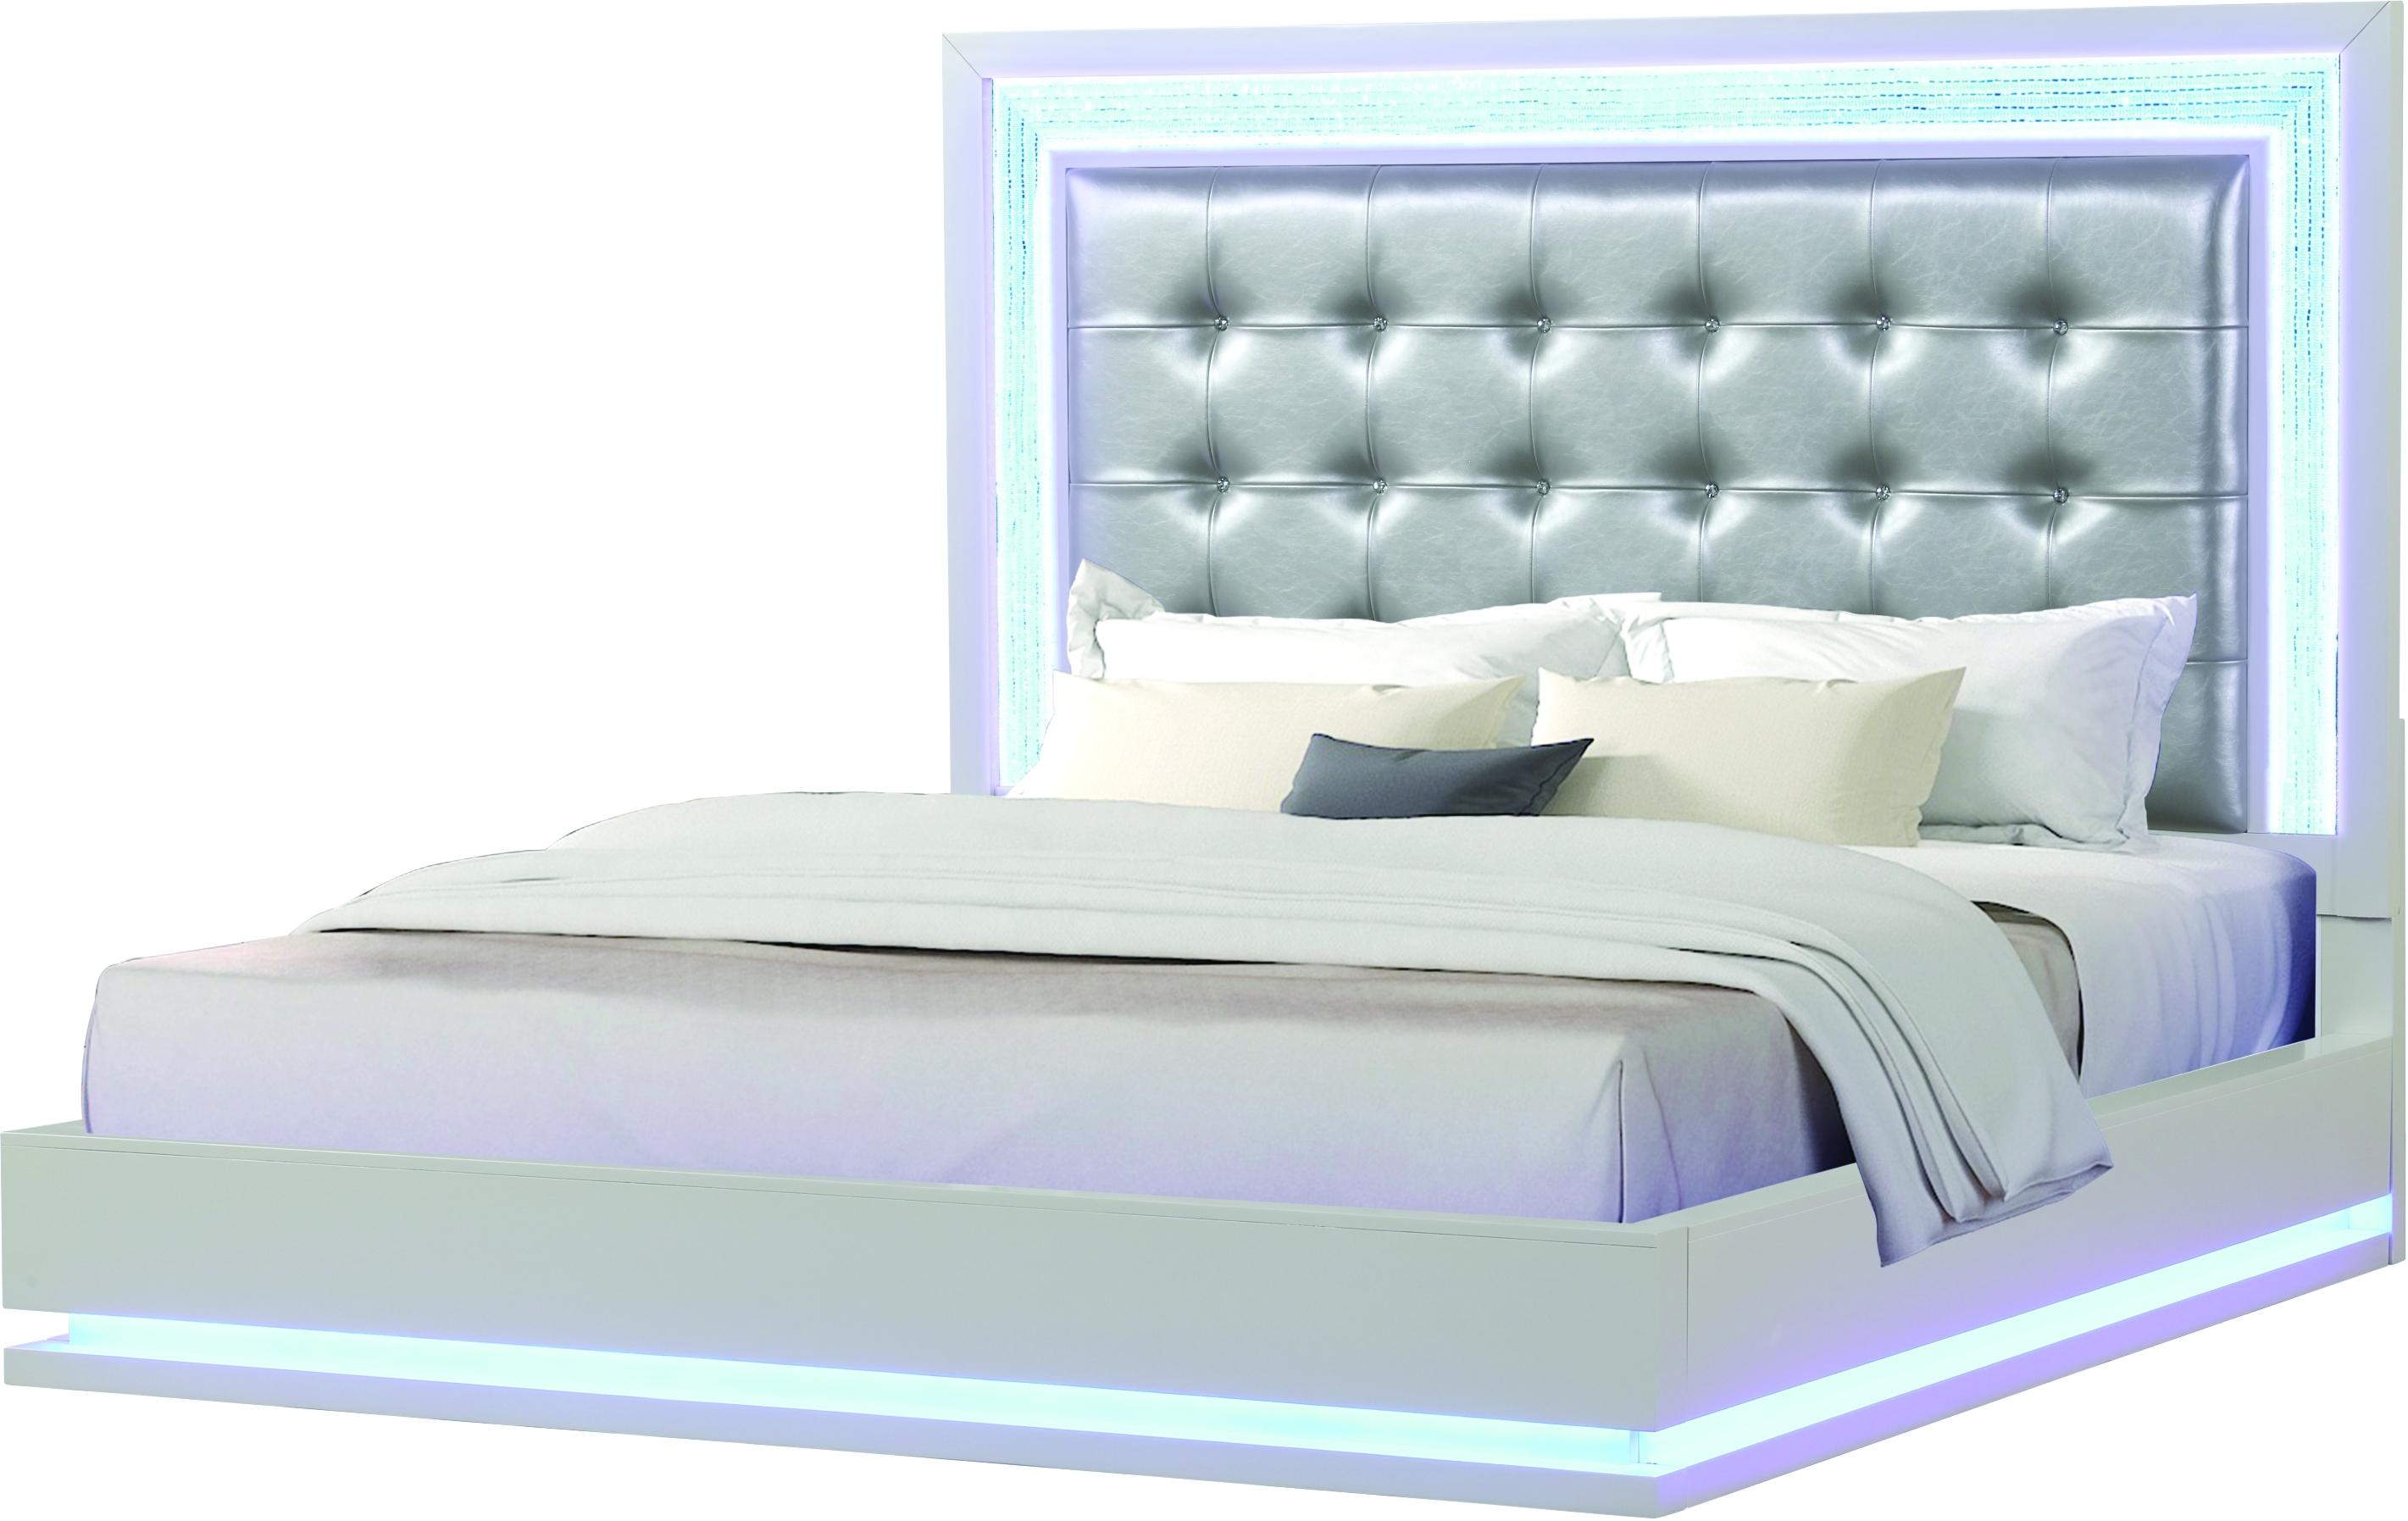 

    
Milky White Tufted King Led Bed PASSION Galaxy Home Contemporary Modern
